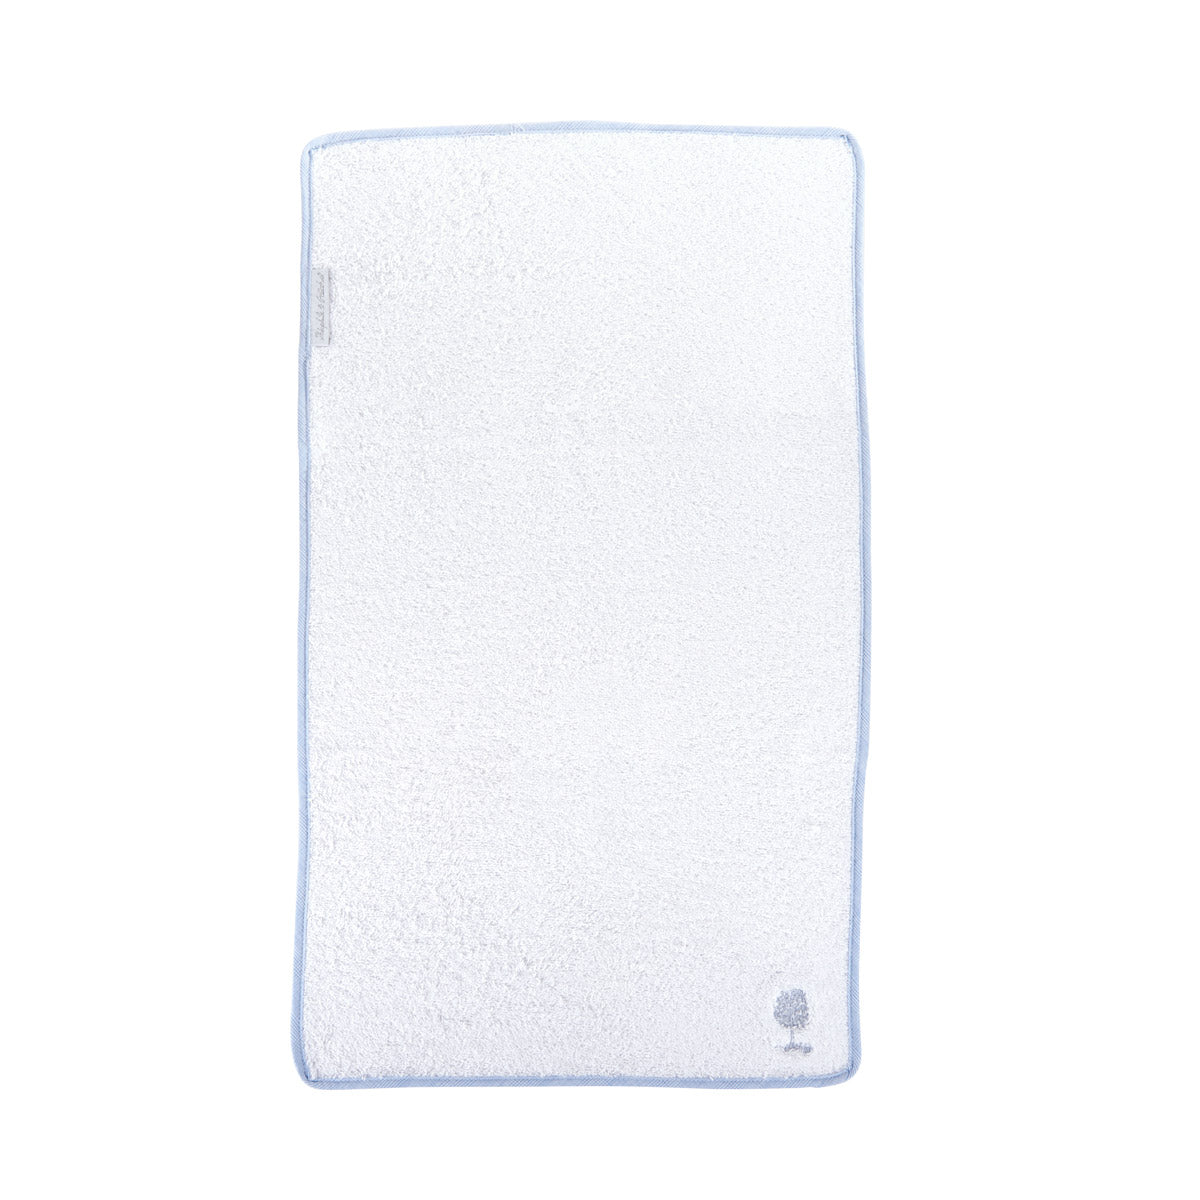 Theophile & Patachou Towel for Changing Mat - Sweet Blue / White